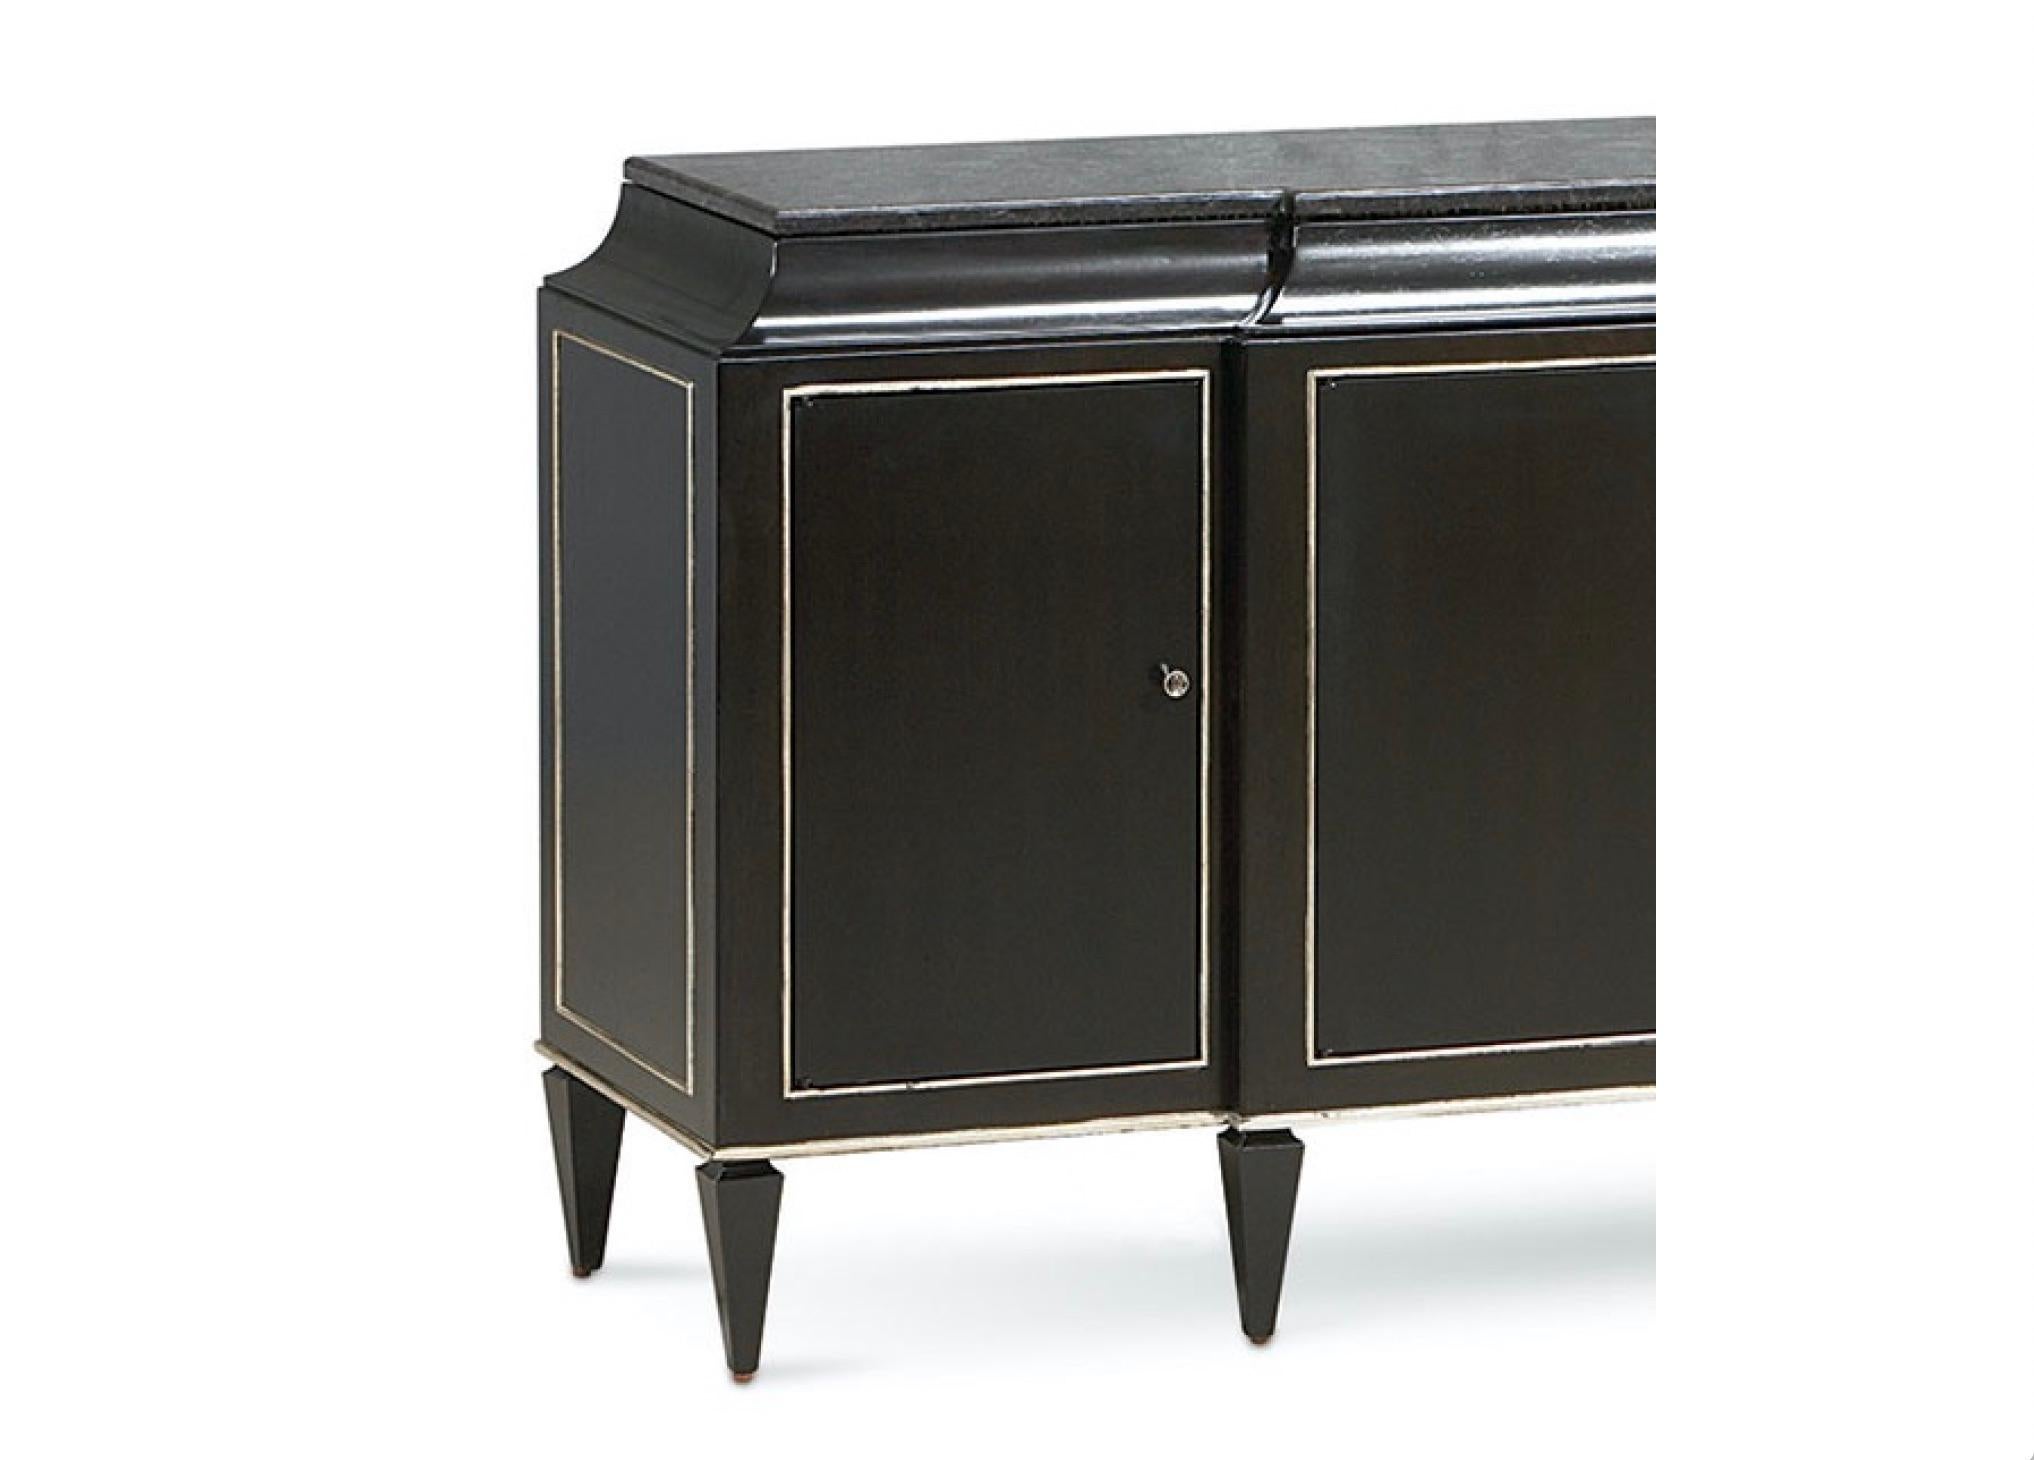 Listed is a stunning, glam caracole sideboard buffet cabinet from the Rive Gauche collection, circa 2016-2017. Handcrafted construction of solid woods and maple veneers, in a dark espresso finish. Black granite stone top. Plenty of storage with four